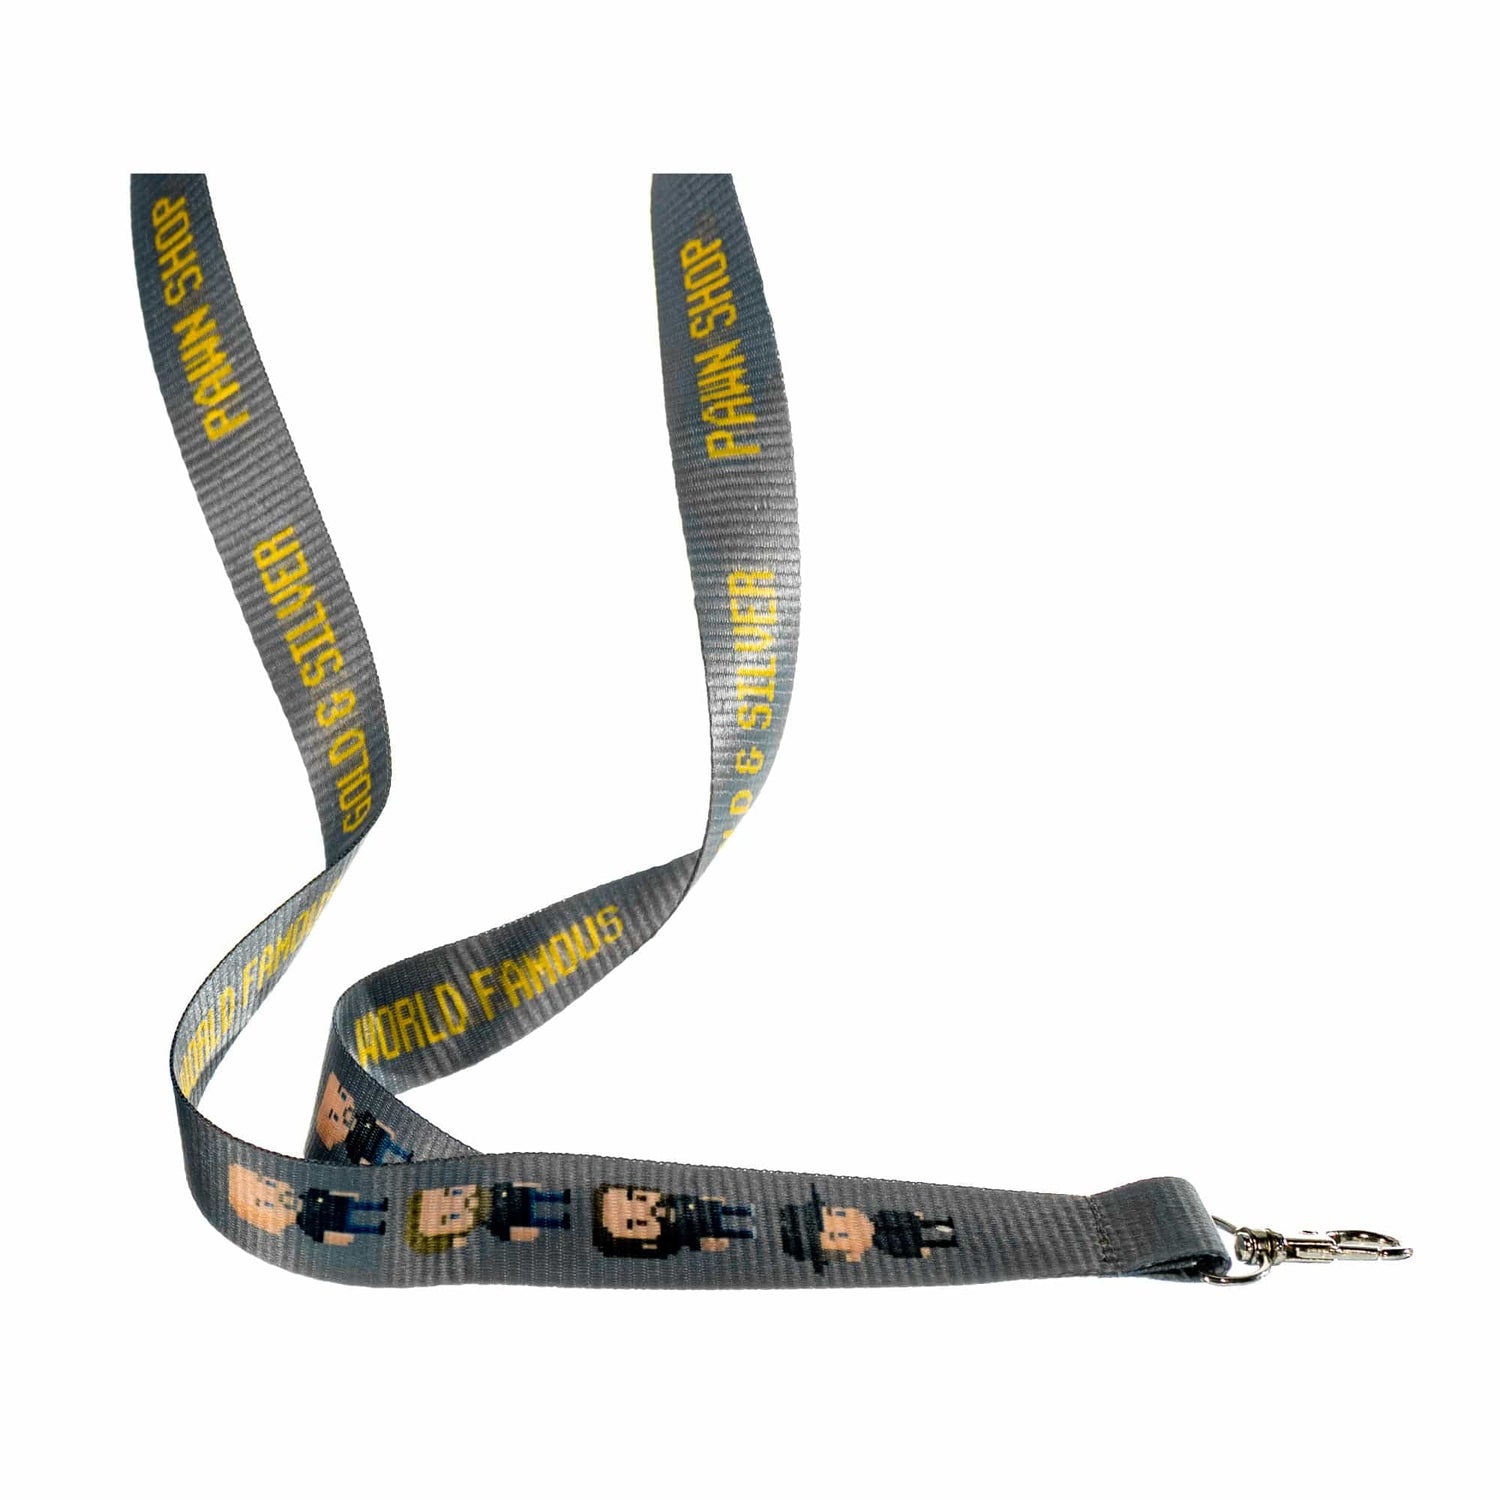 Gold & Silver Pawn Shop "The Guys" Lanyard Front View